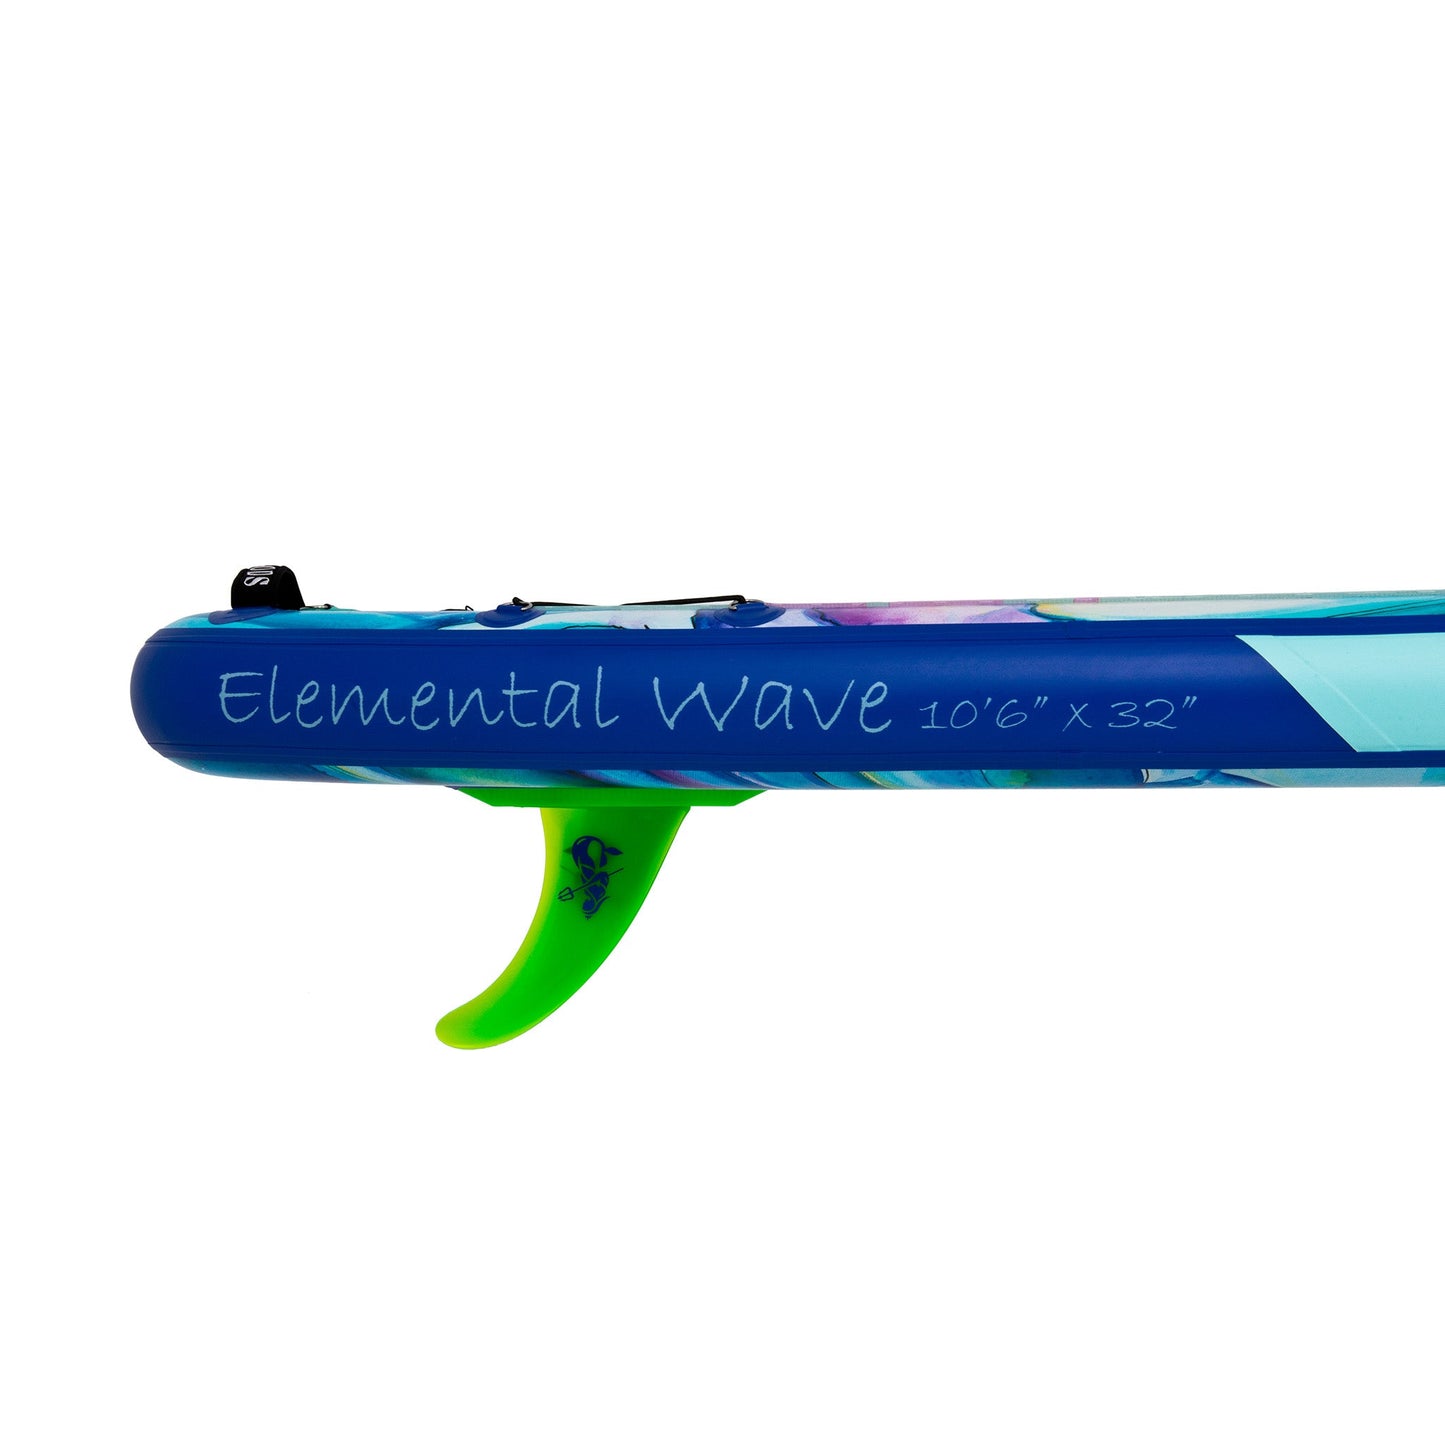 Elemental Wave product shot of the fin and brand name